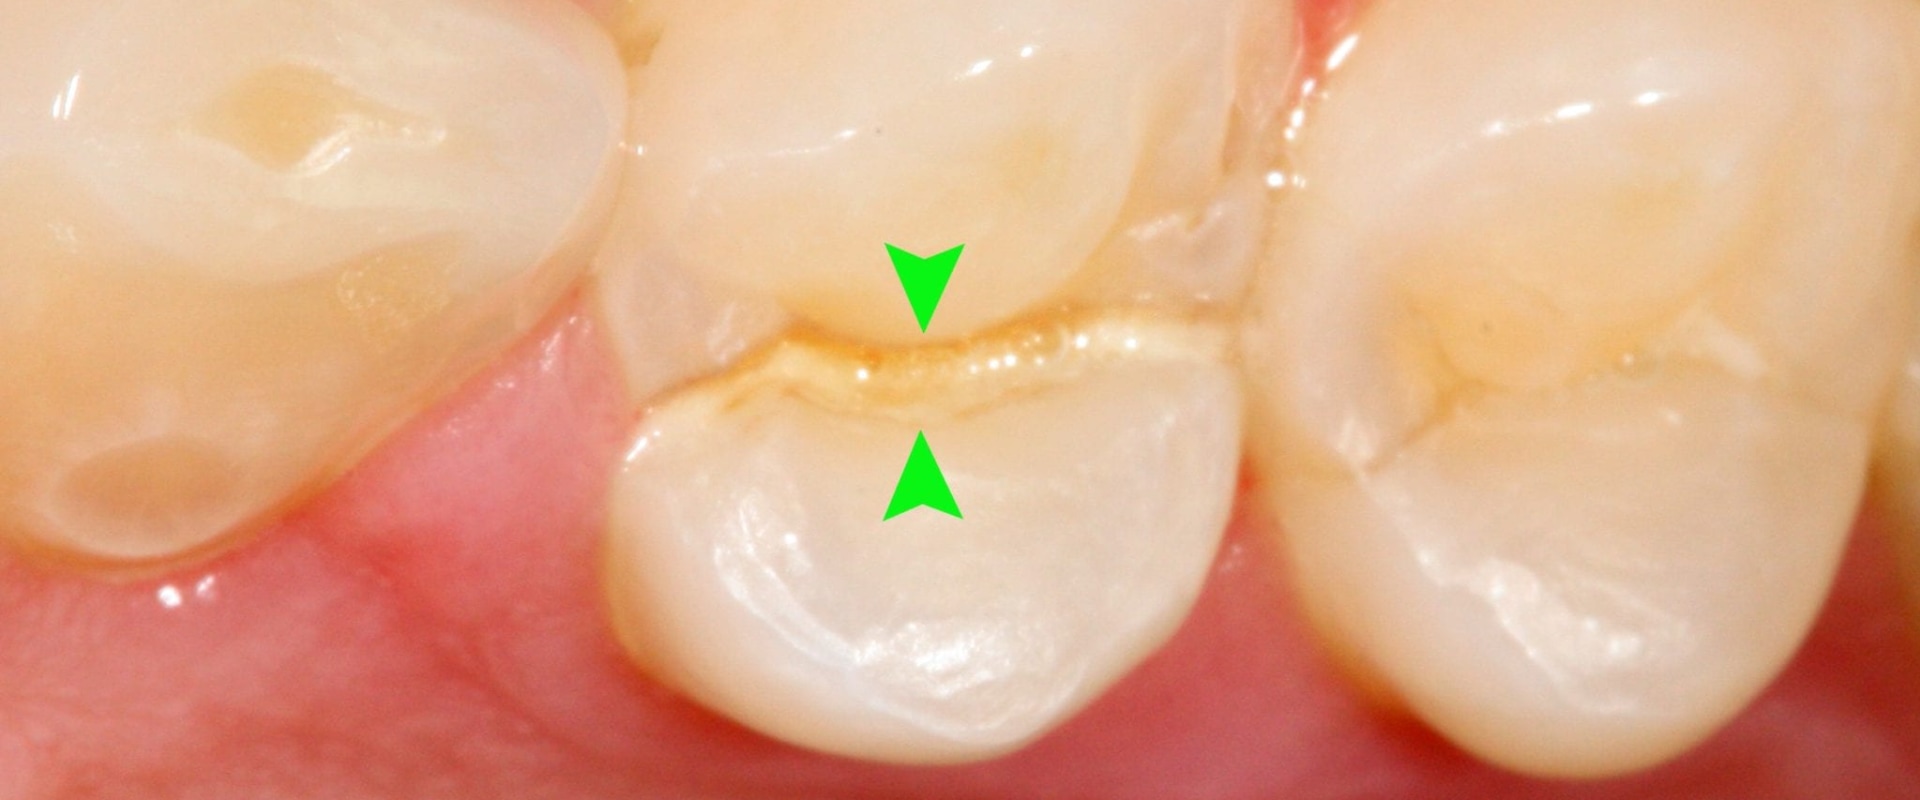 What Happens if You Leave a Chipped Tooth Untreated?